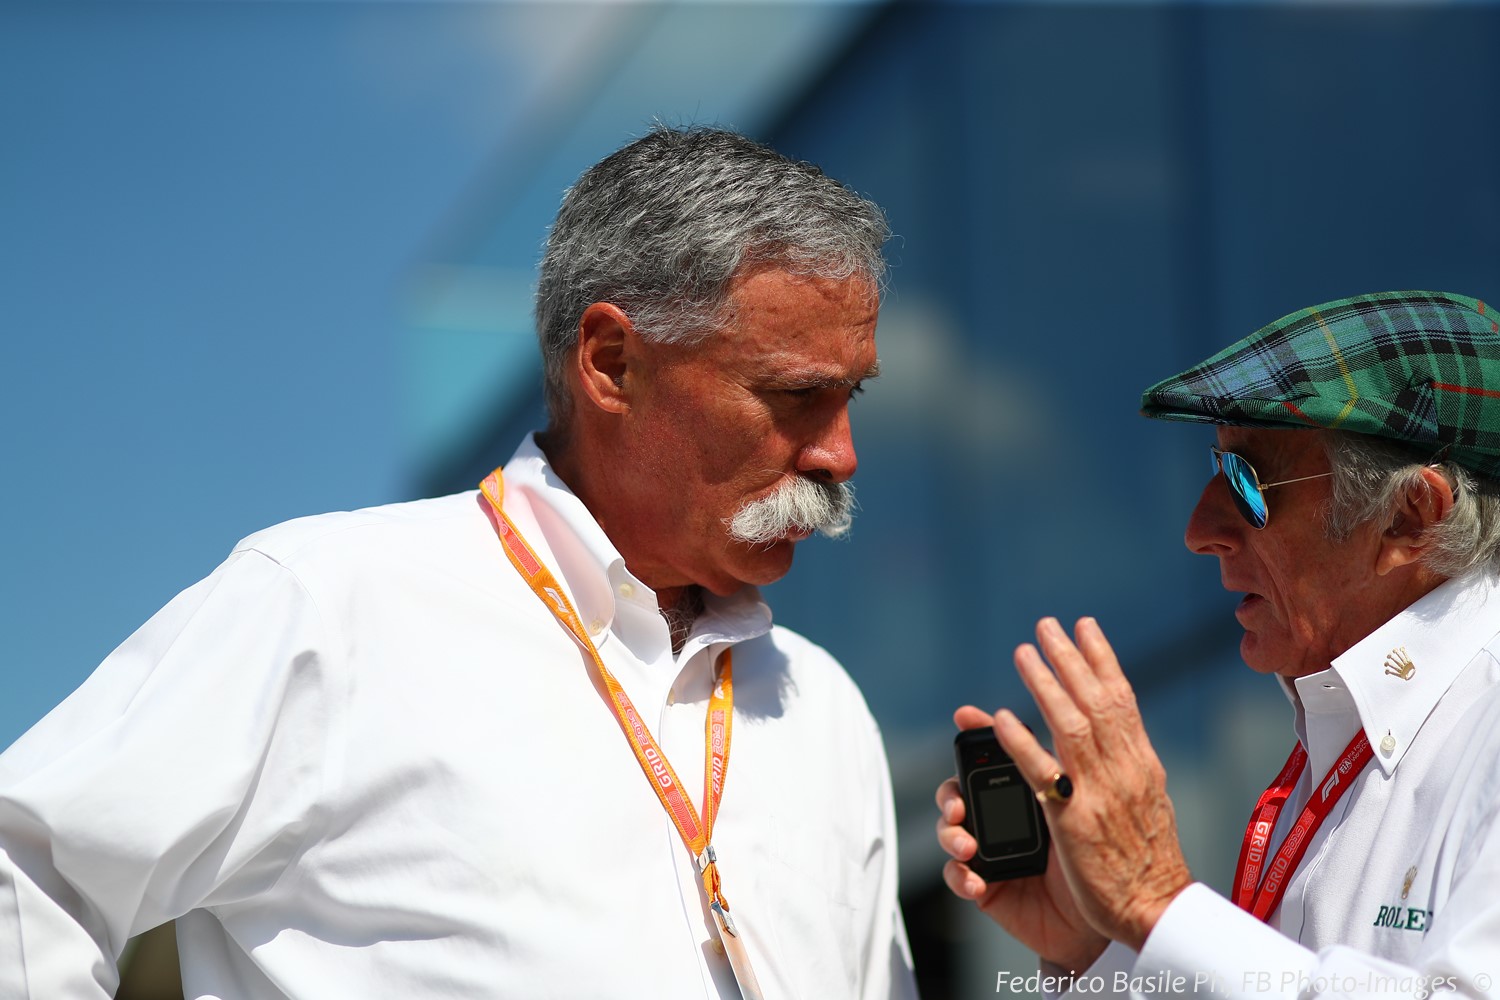 F1 CEO Chase Carey